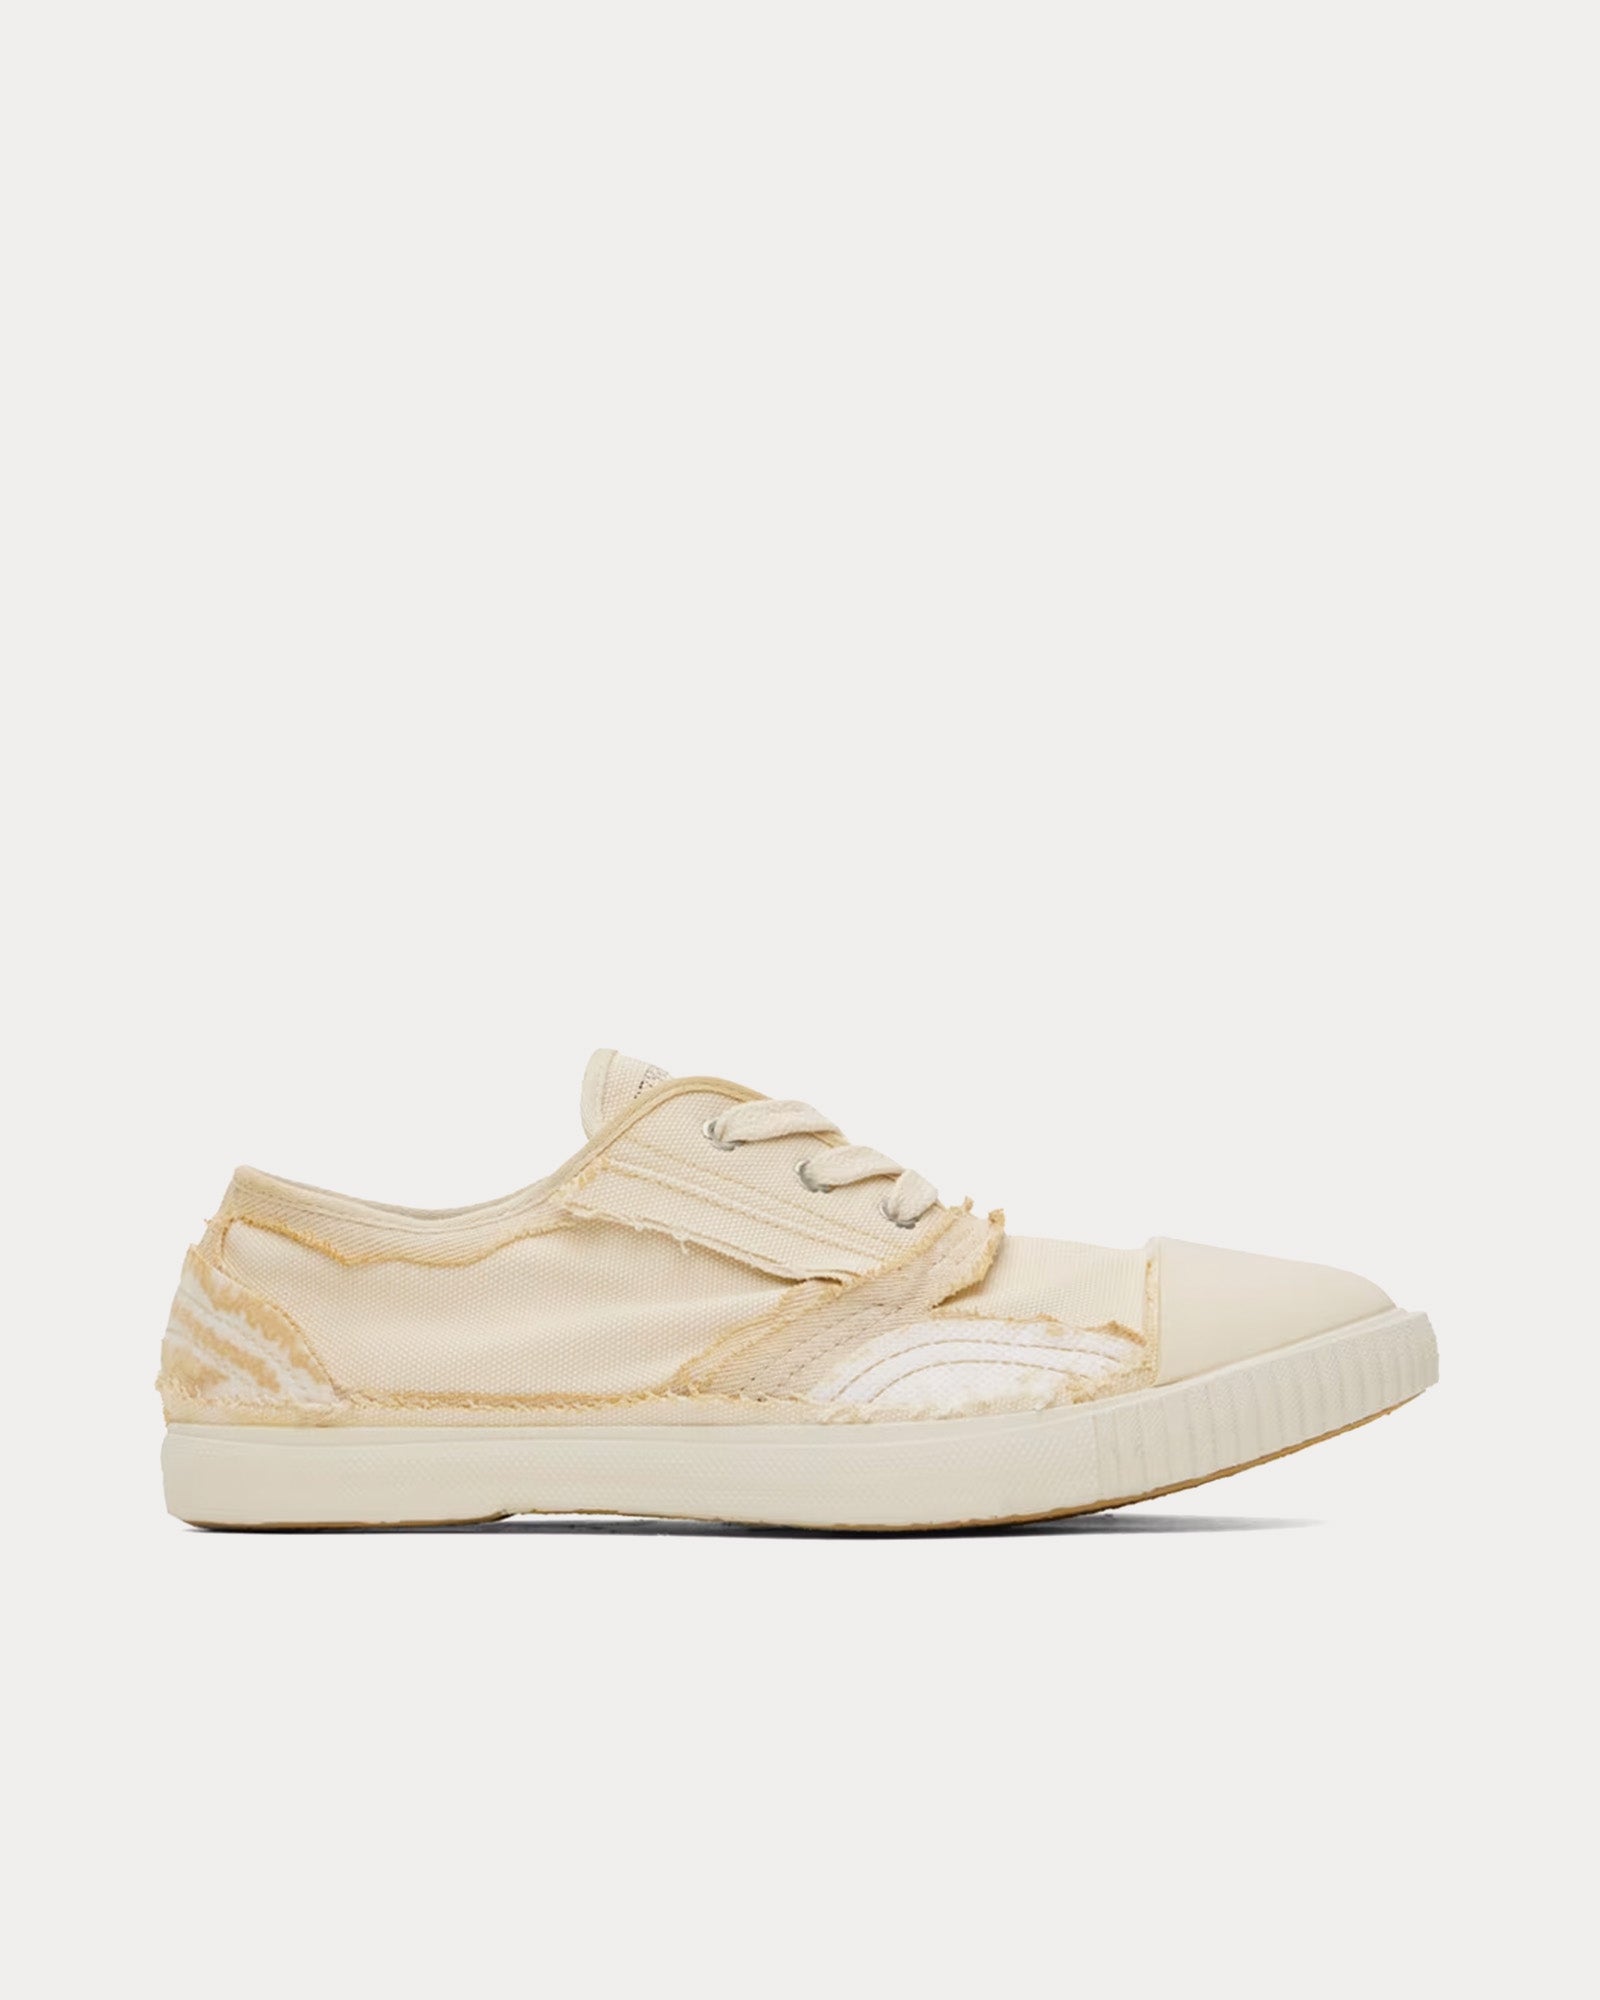 Maison Margiela - Inside-Out Canvas Natural Mix Low Top Sneakers